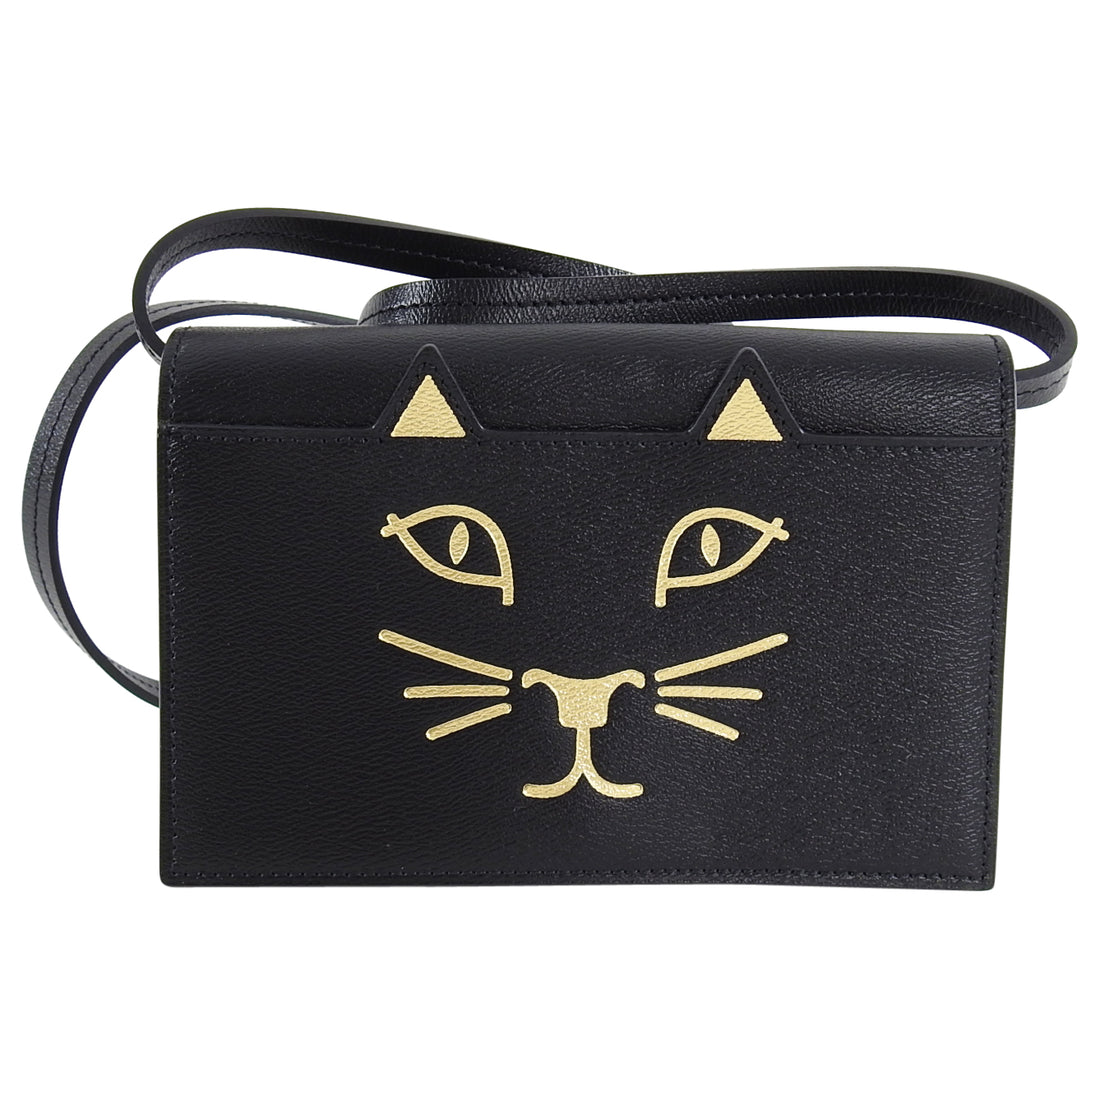 Charlotte Olympia Small Black and Gold Cat Feline Bag – I MISS YOU VINTAGE